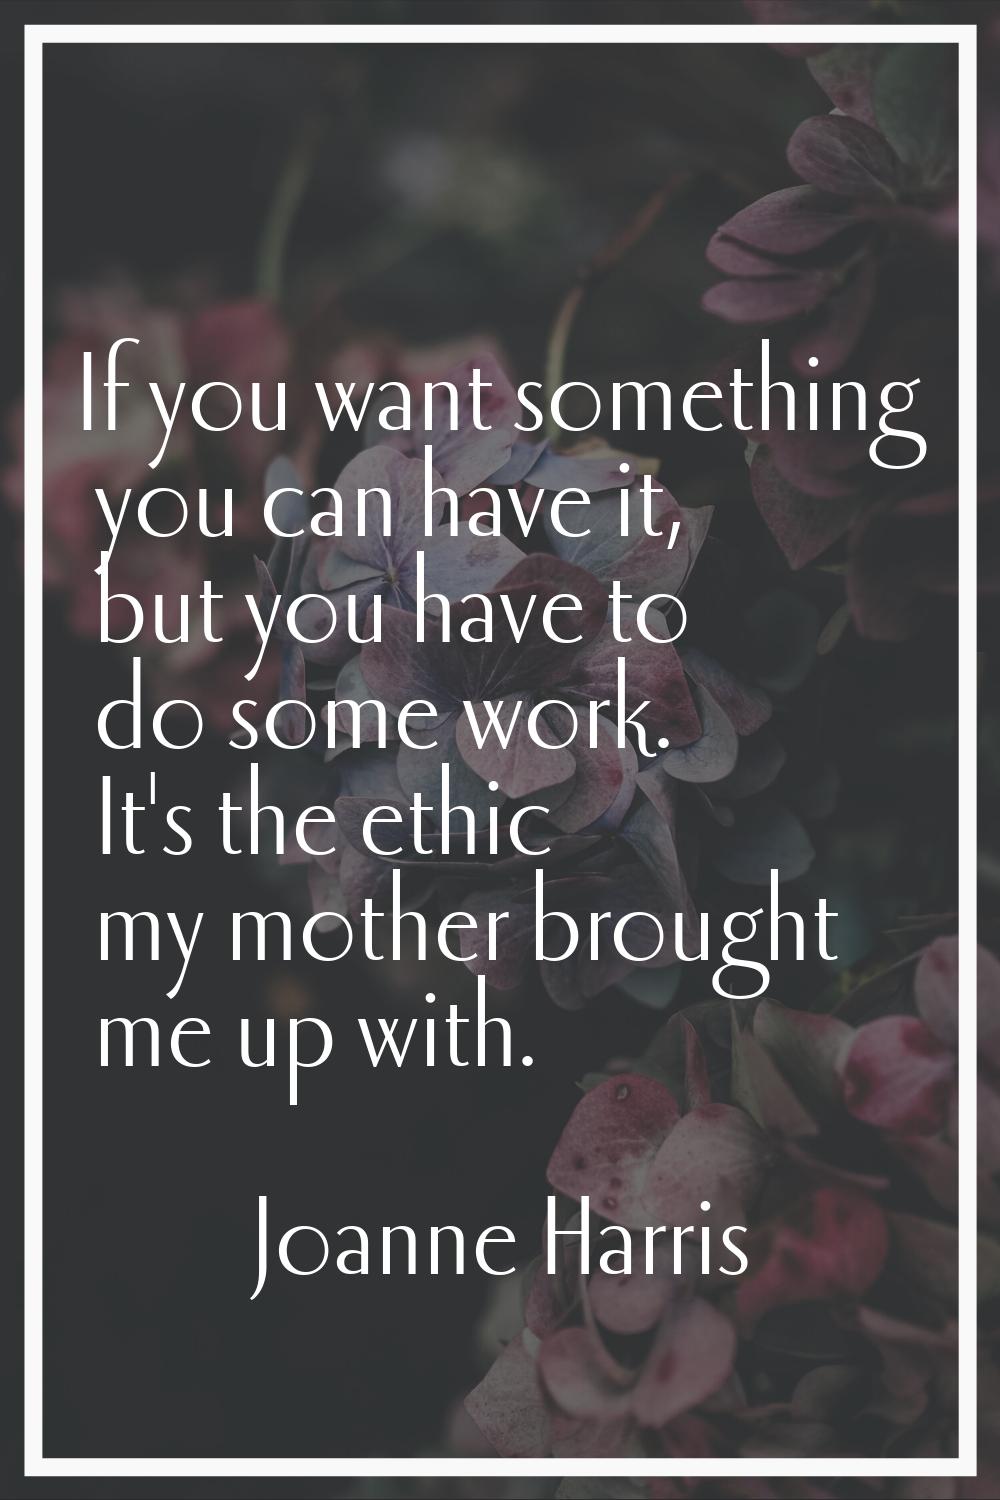 If you want something you can have it, but you have to do some work. It's the ethic my mother broug